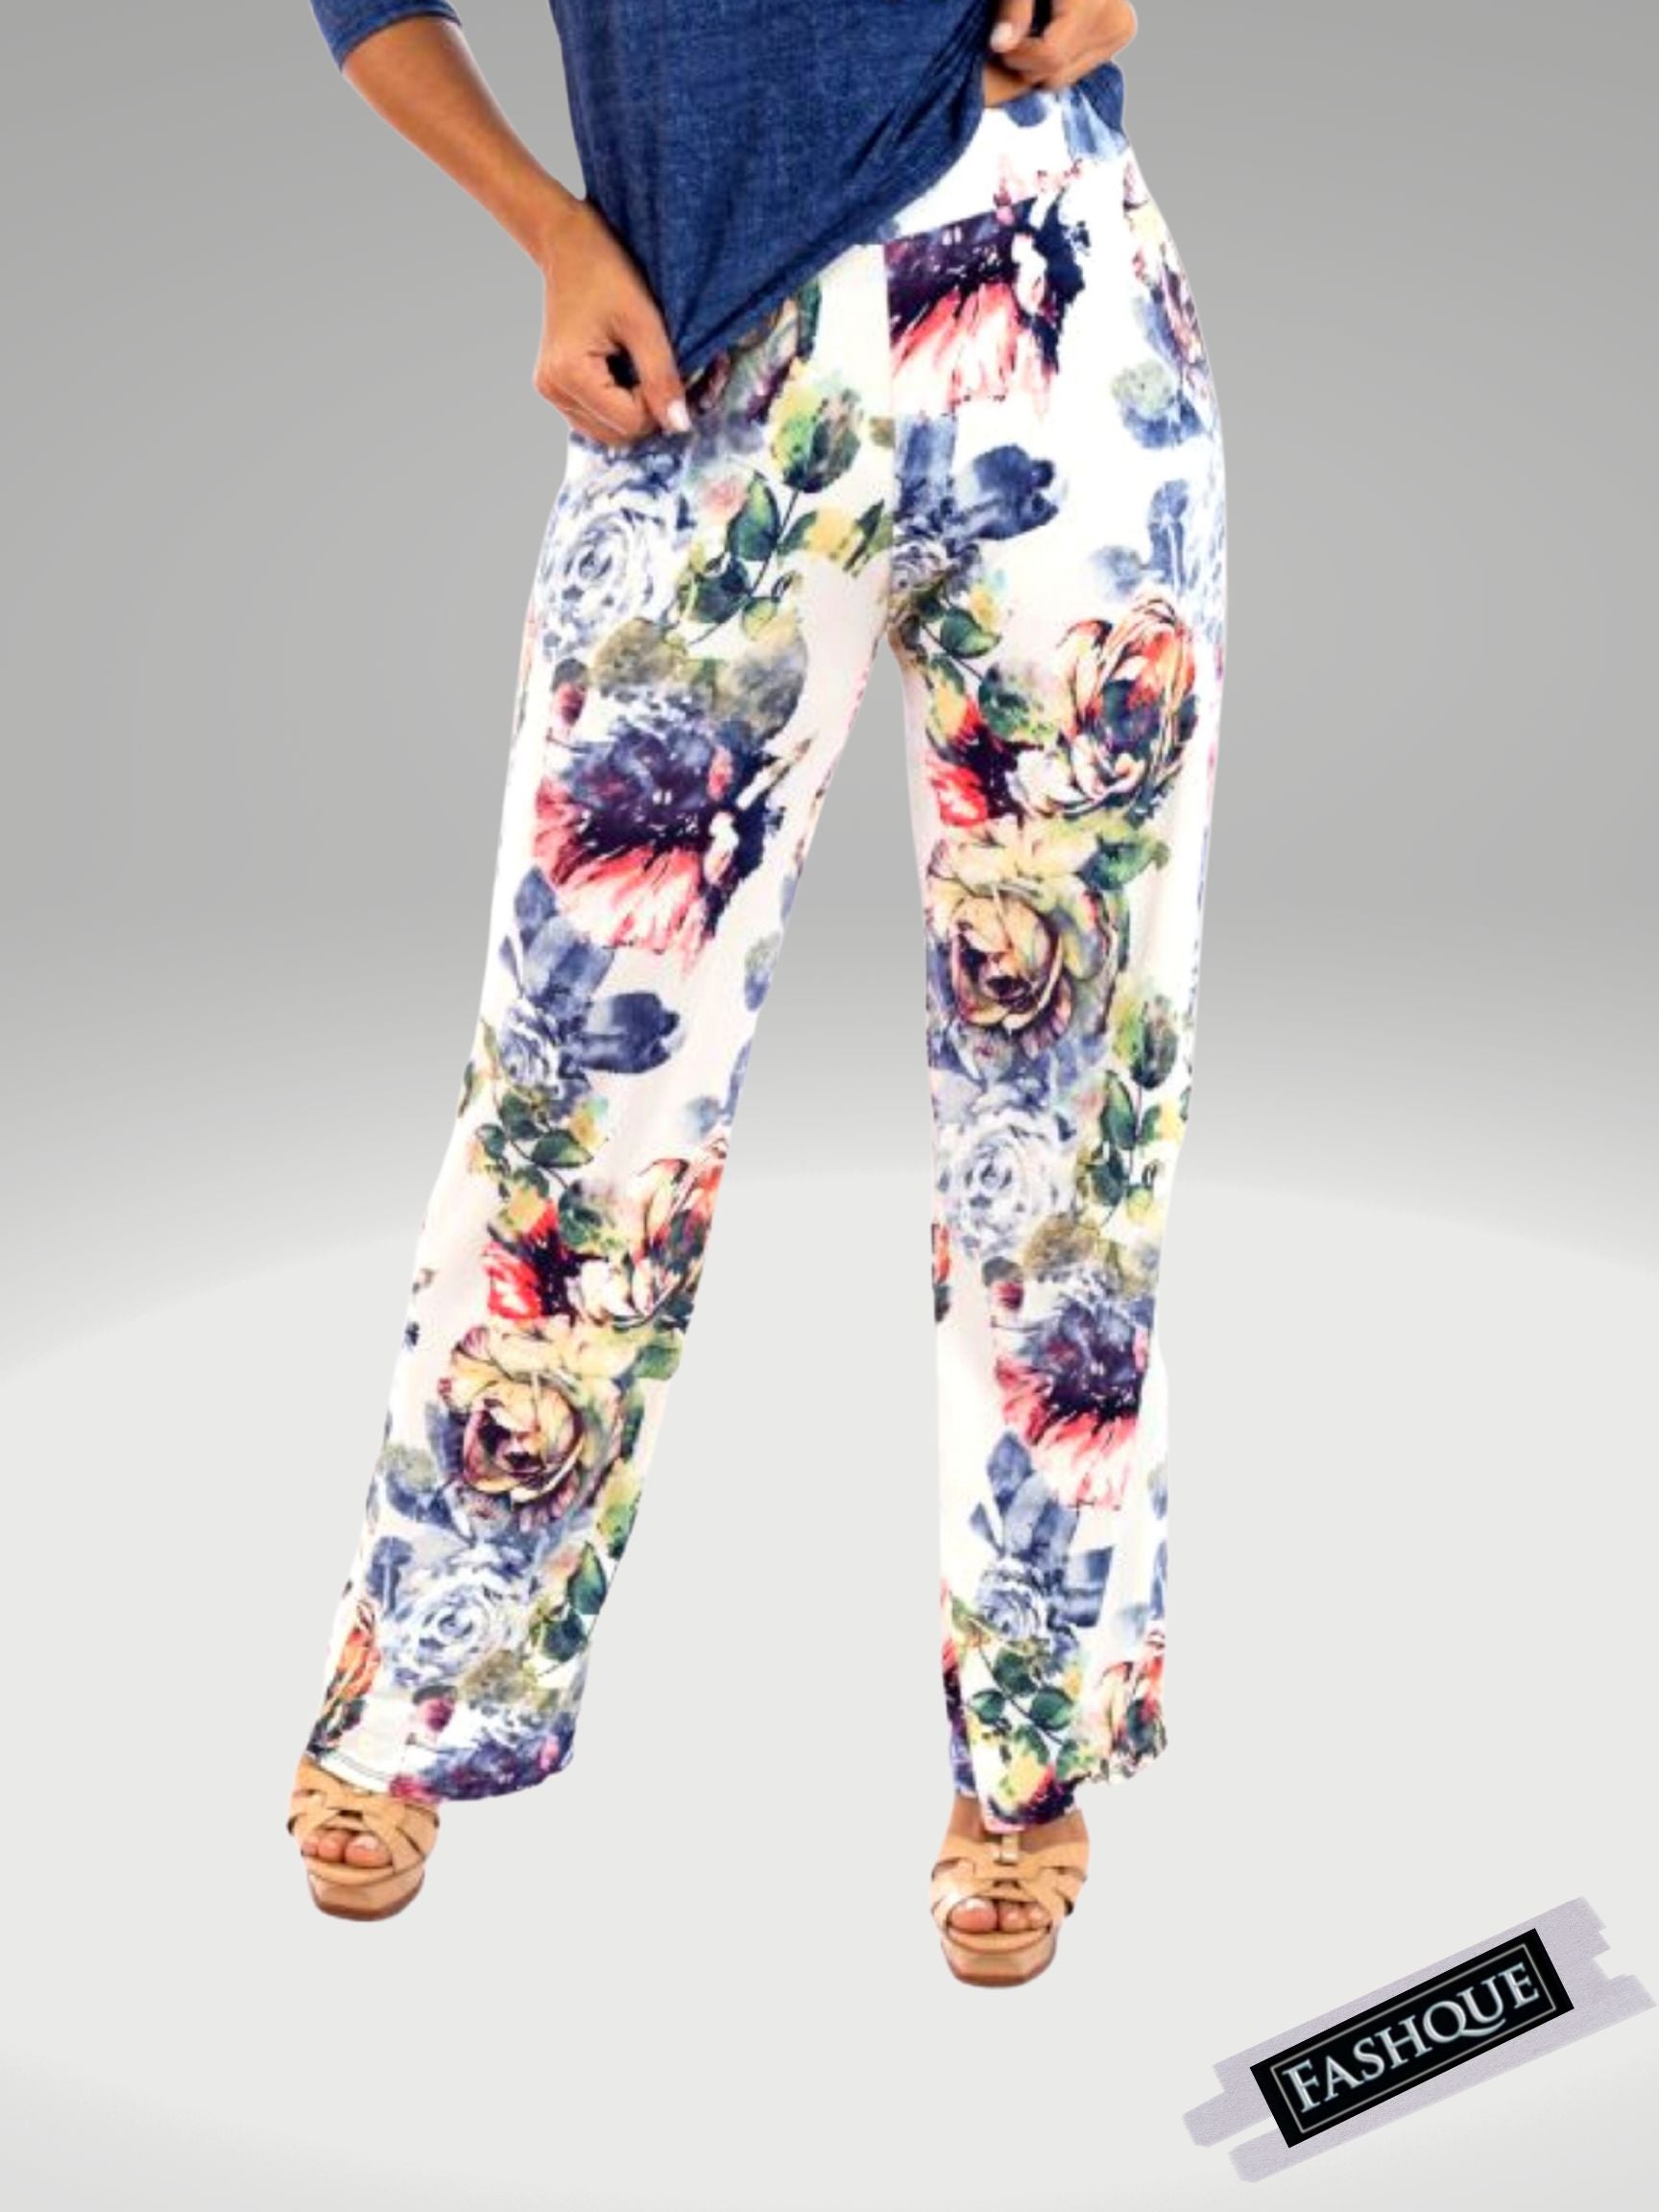 FASHQUE - Mid Rise Straight Leg Pull-on Printed Palazzo - P017 SALE